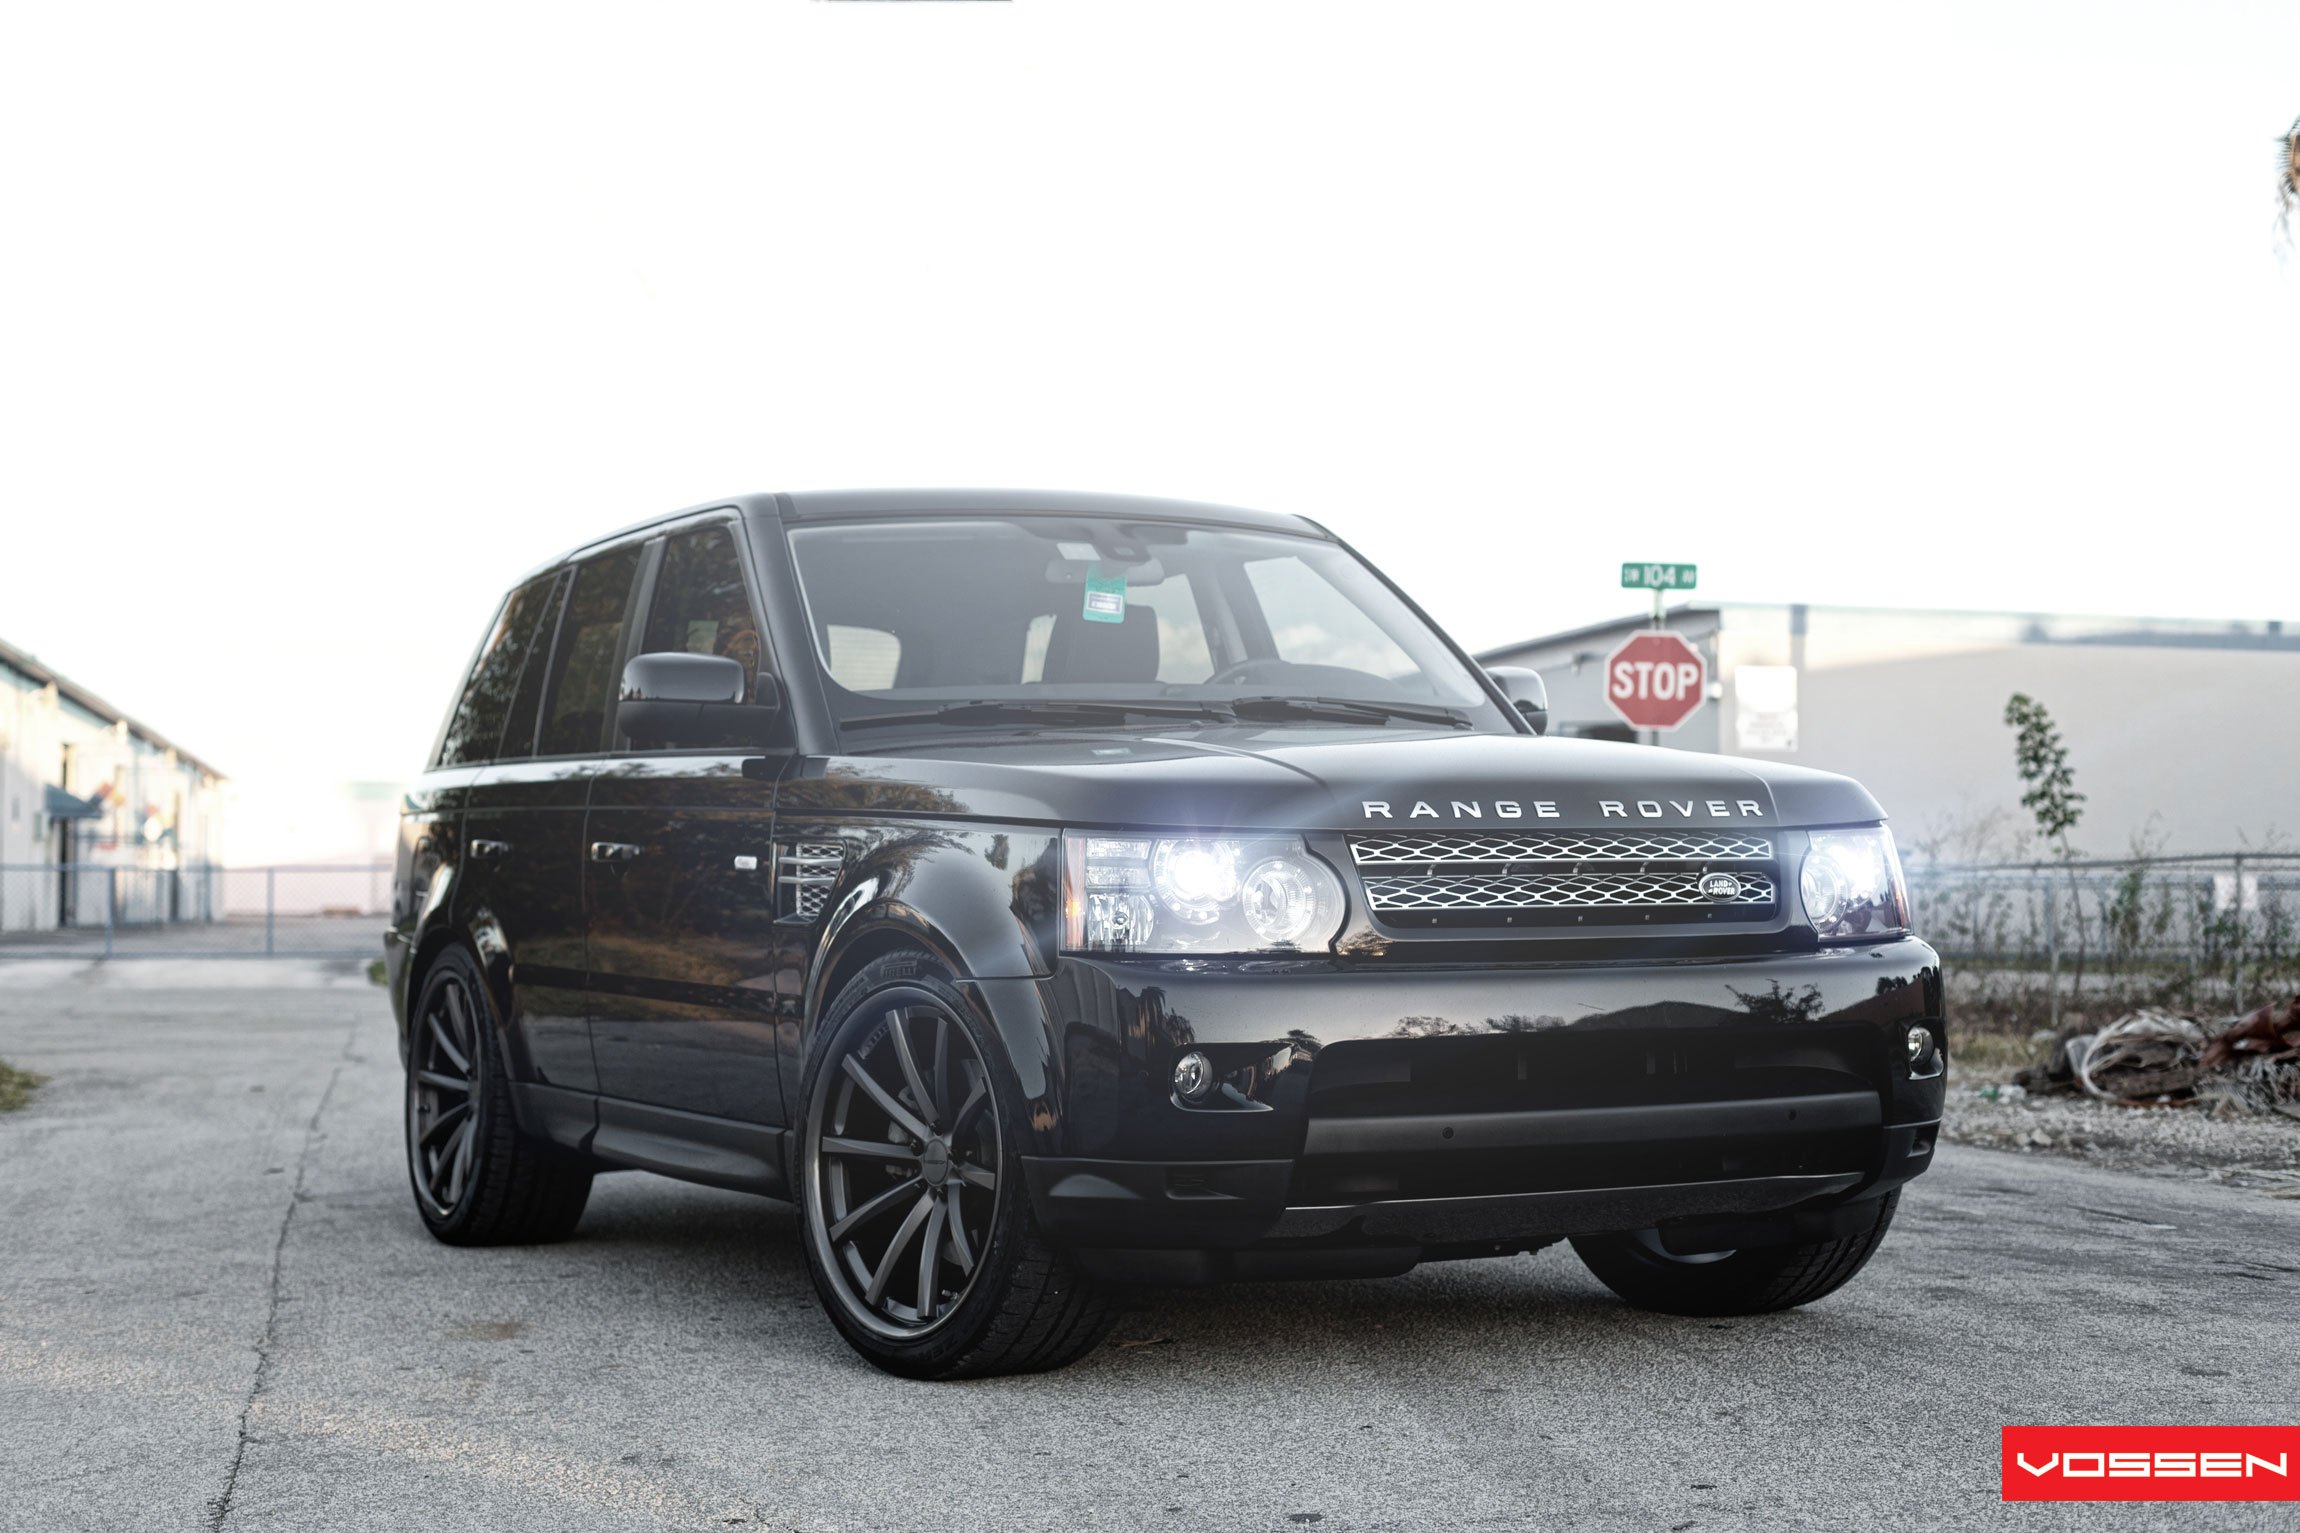 Custom Black Land Rover Sport with Chrome Mesh Grille - Photo by Vossen